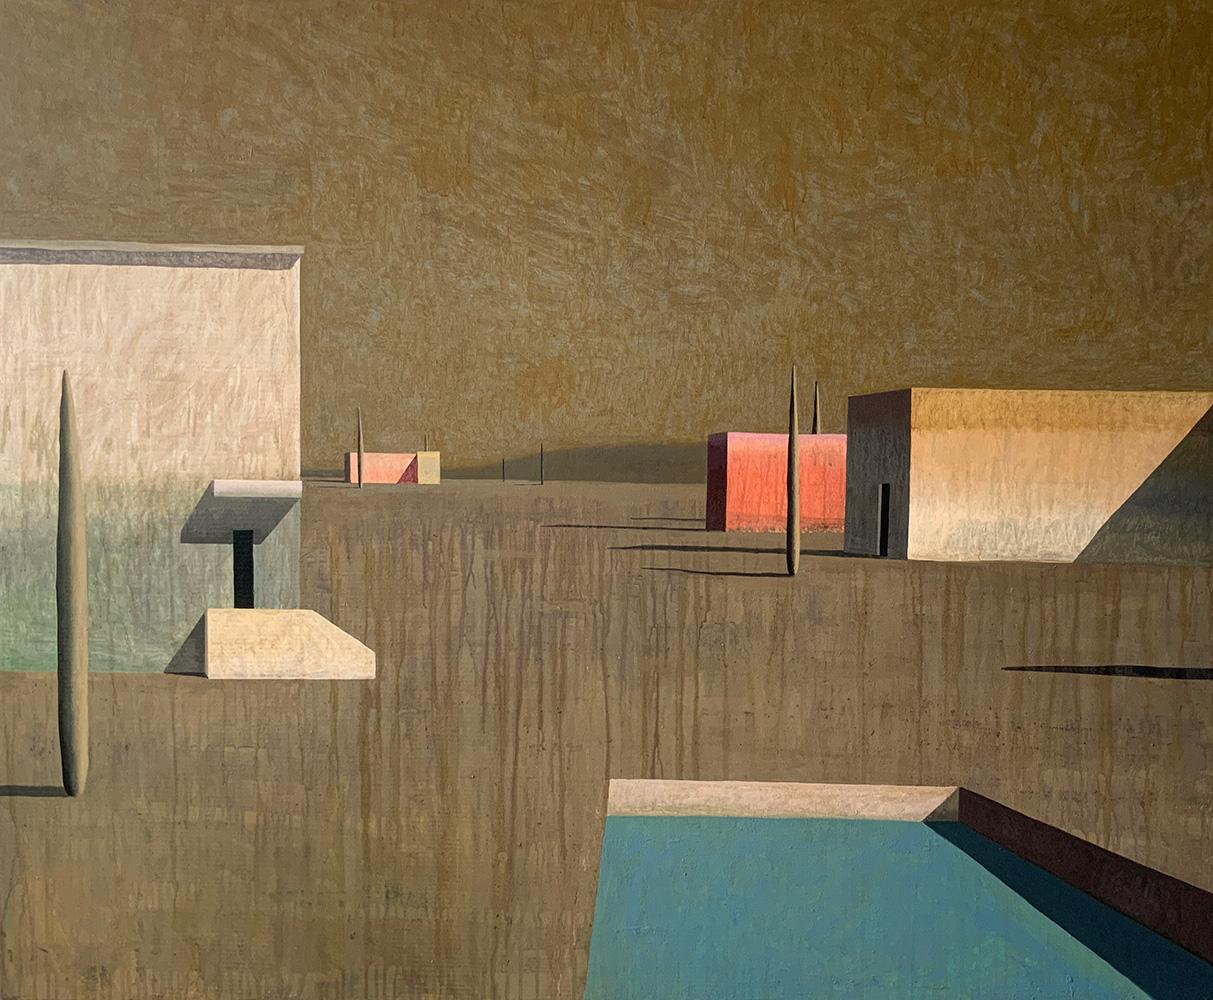 Architectura Ocre by Ramon Enrich - geometric landscape painting, earth tones